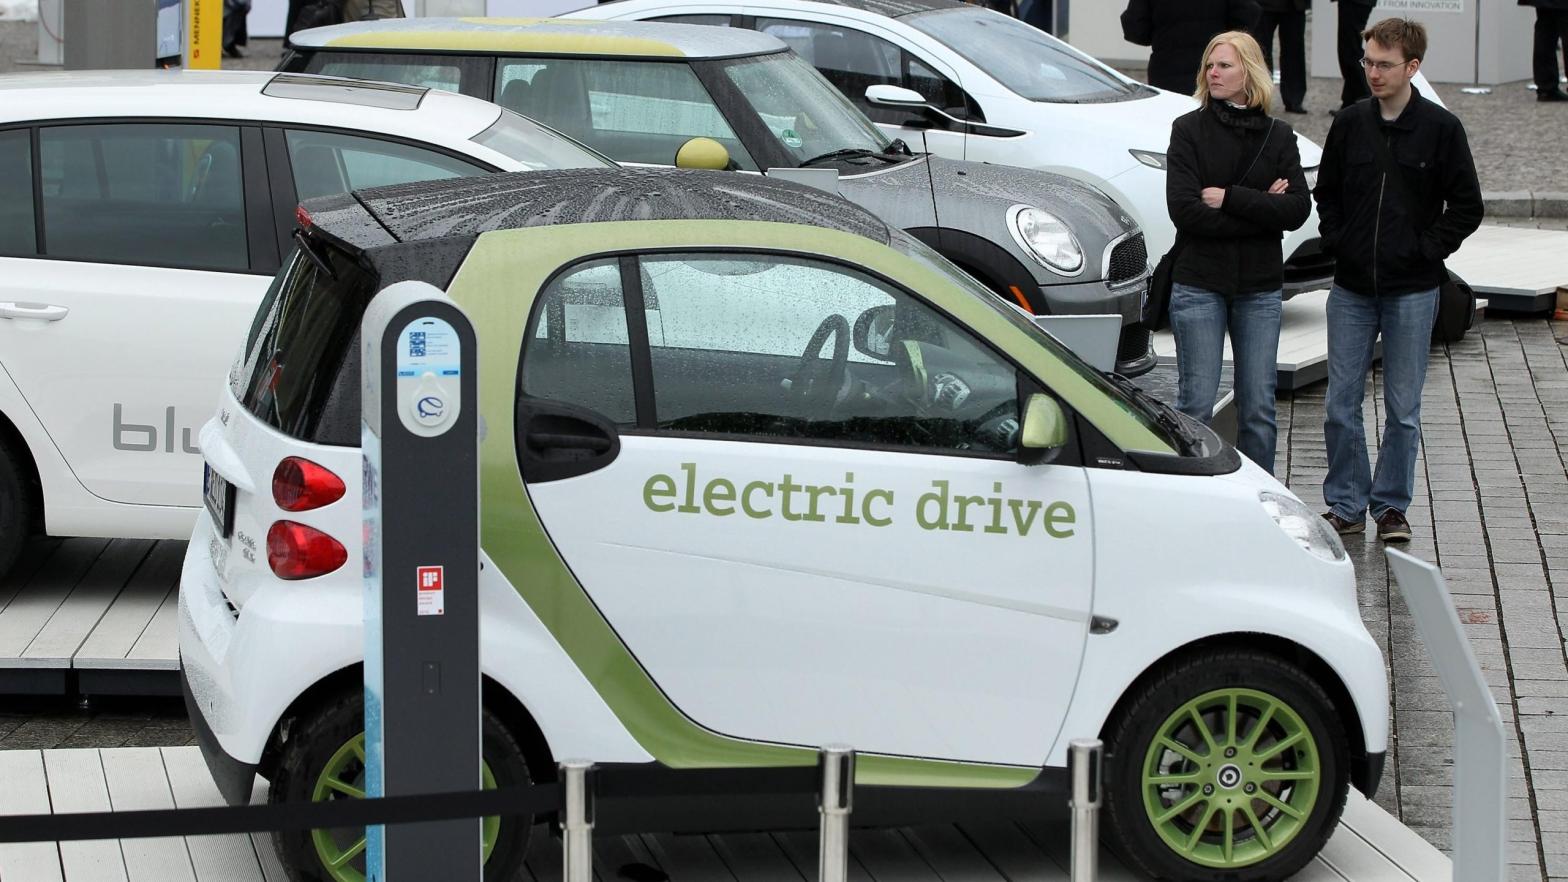 An electric vehicle requires six times more minerals than a traditional, fossil-powered car, the report says. (Photo: Sean Gallup, Getty Images)